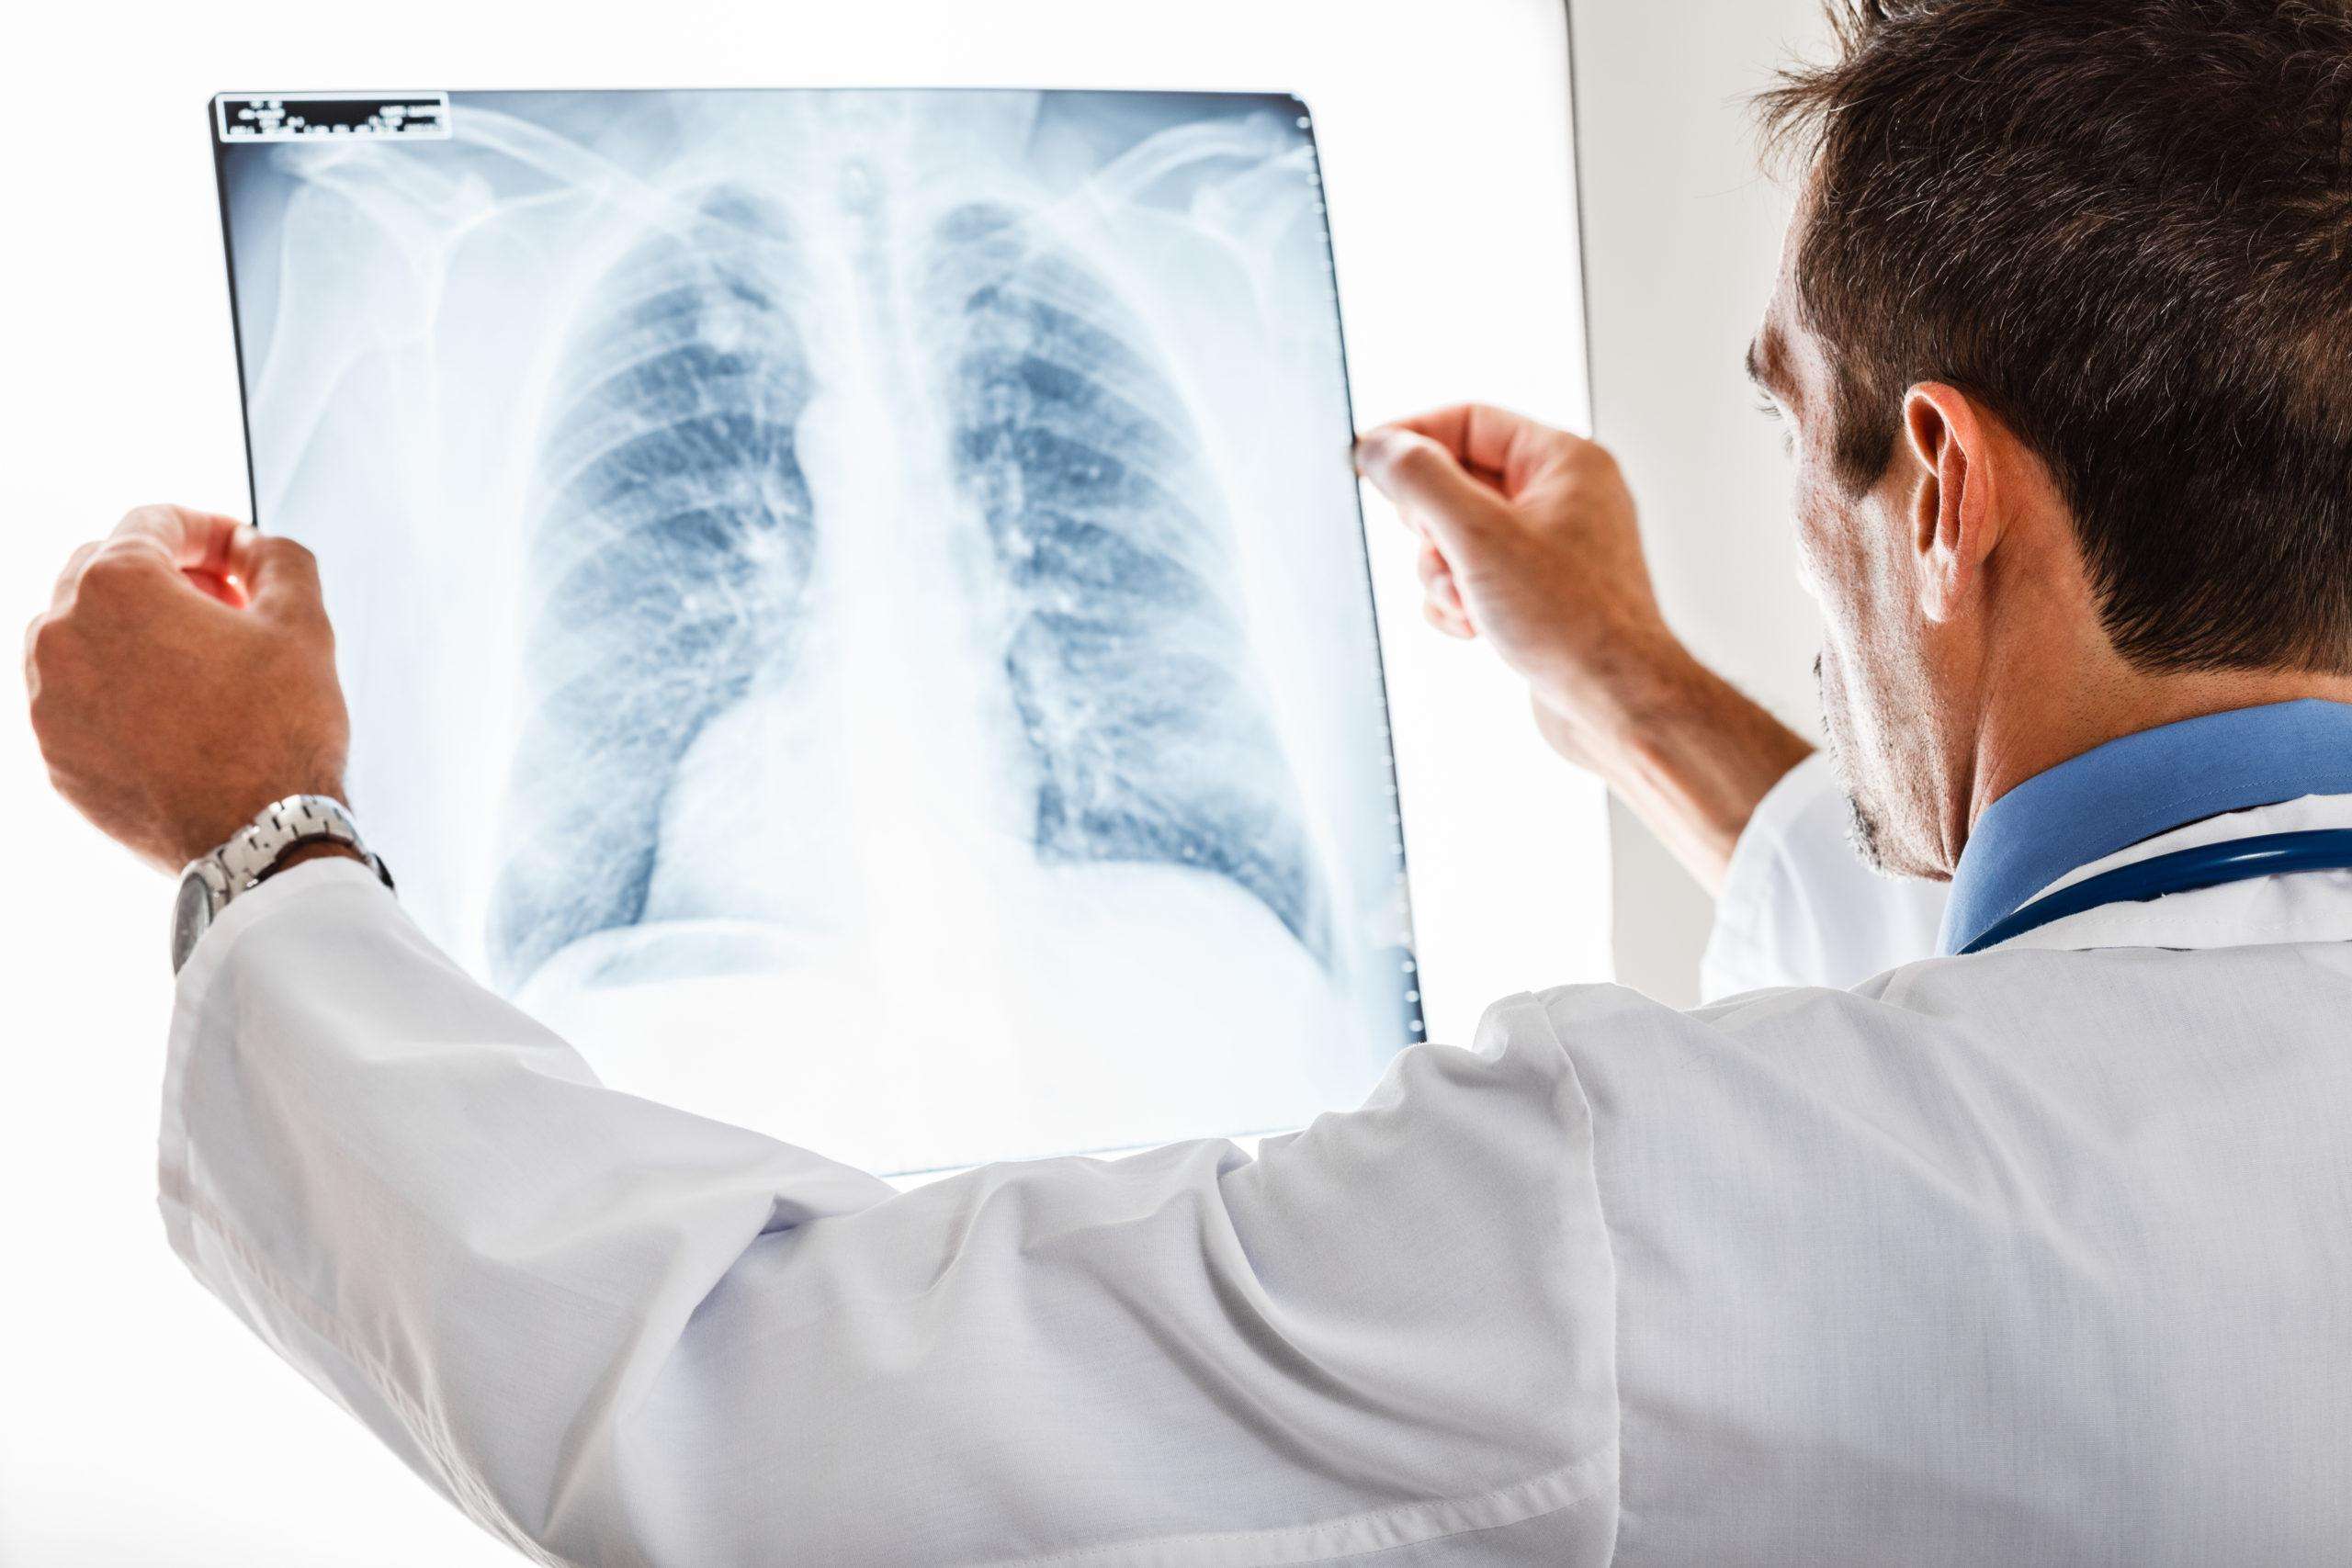 How Quickly Do Symptoms Progress in Lung Cancer?